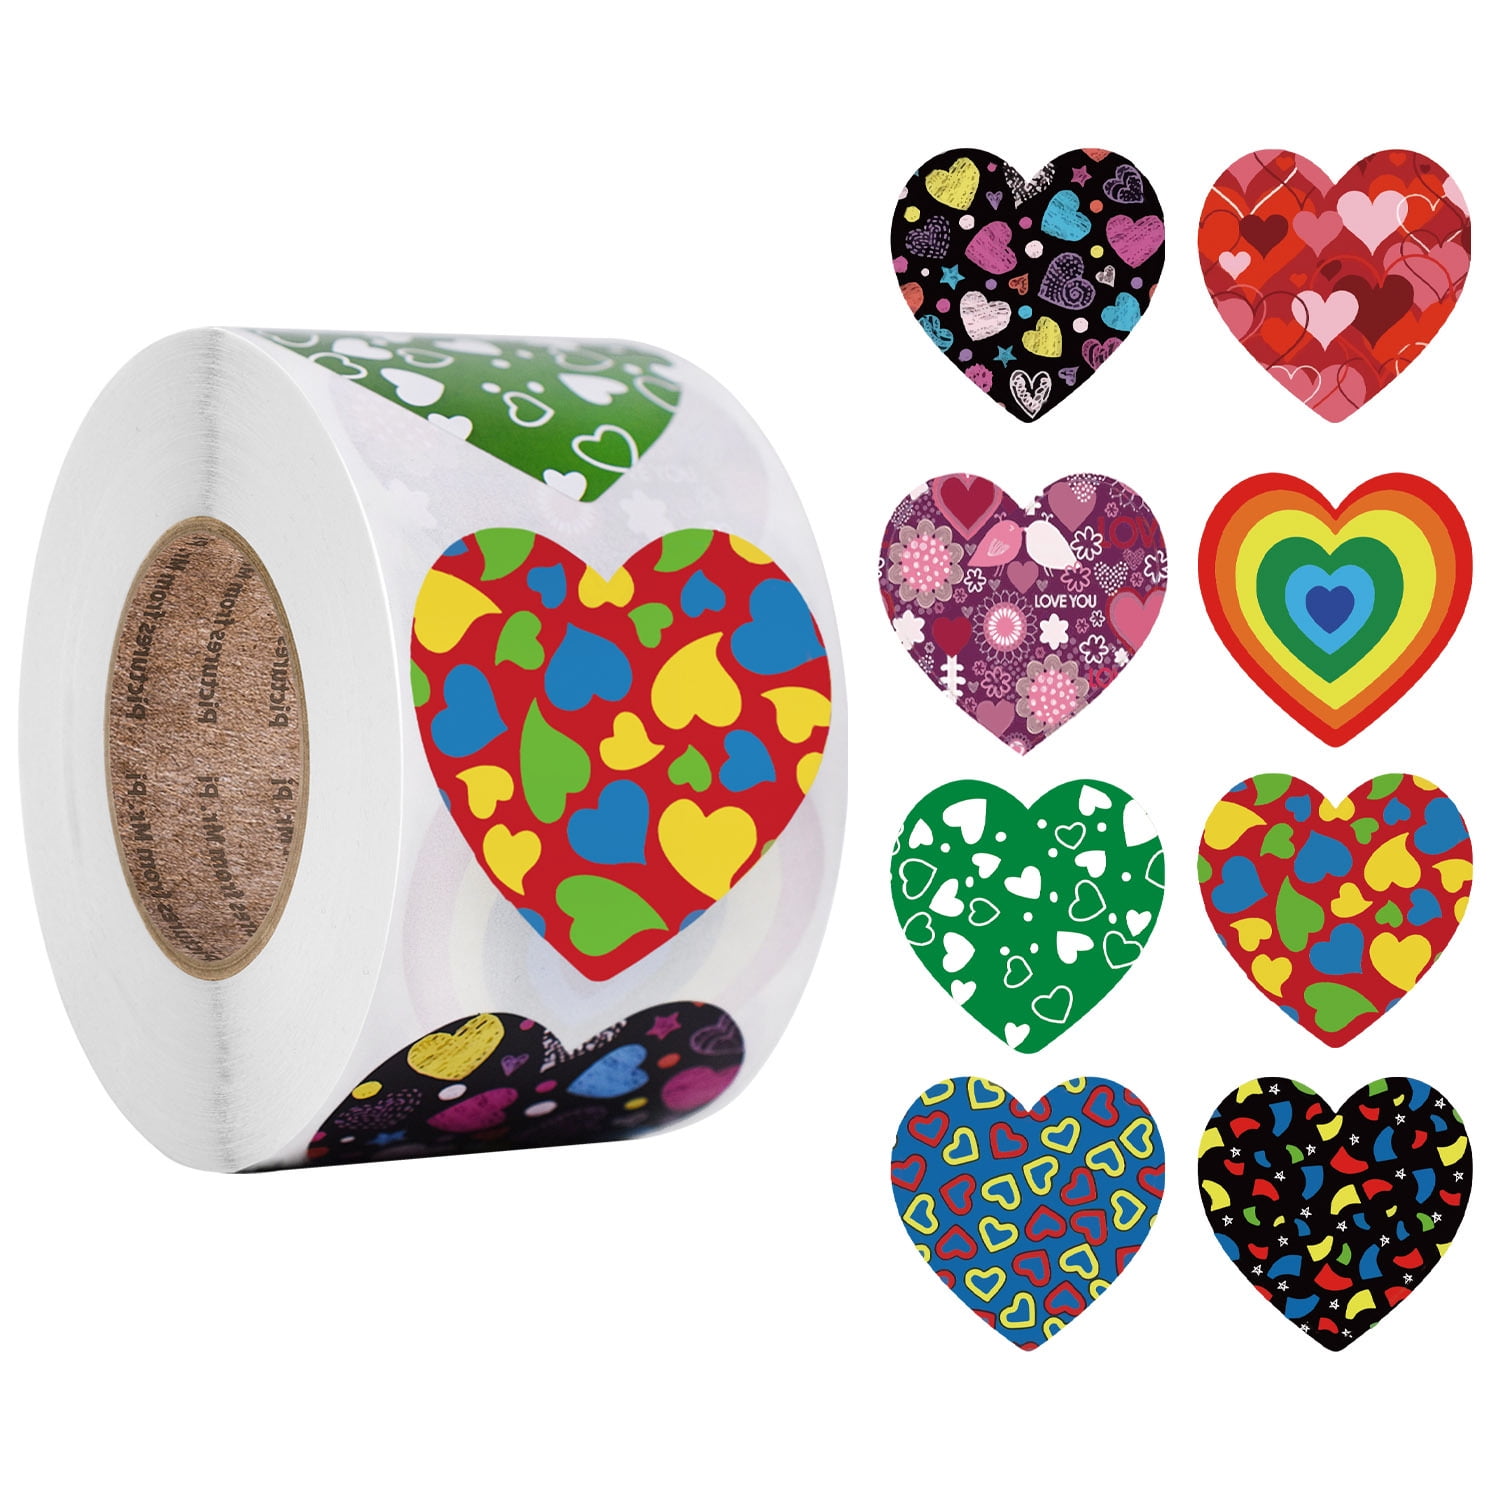 30 HEART TRUCK VALENTINE'S DAY ENVELOPE SEALS LABELS STICKERS PARTY FAVORS 1.5" 